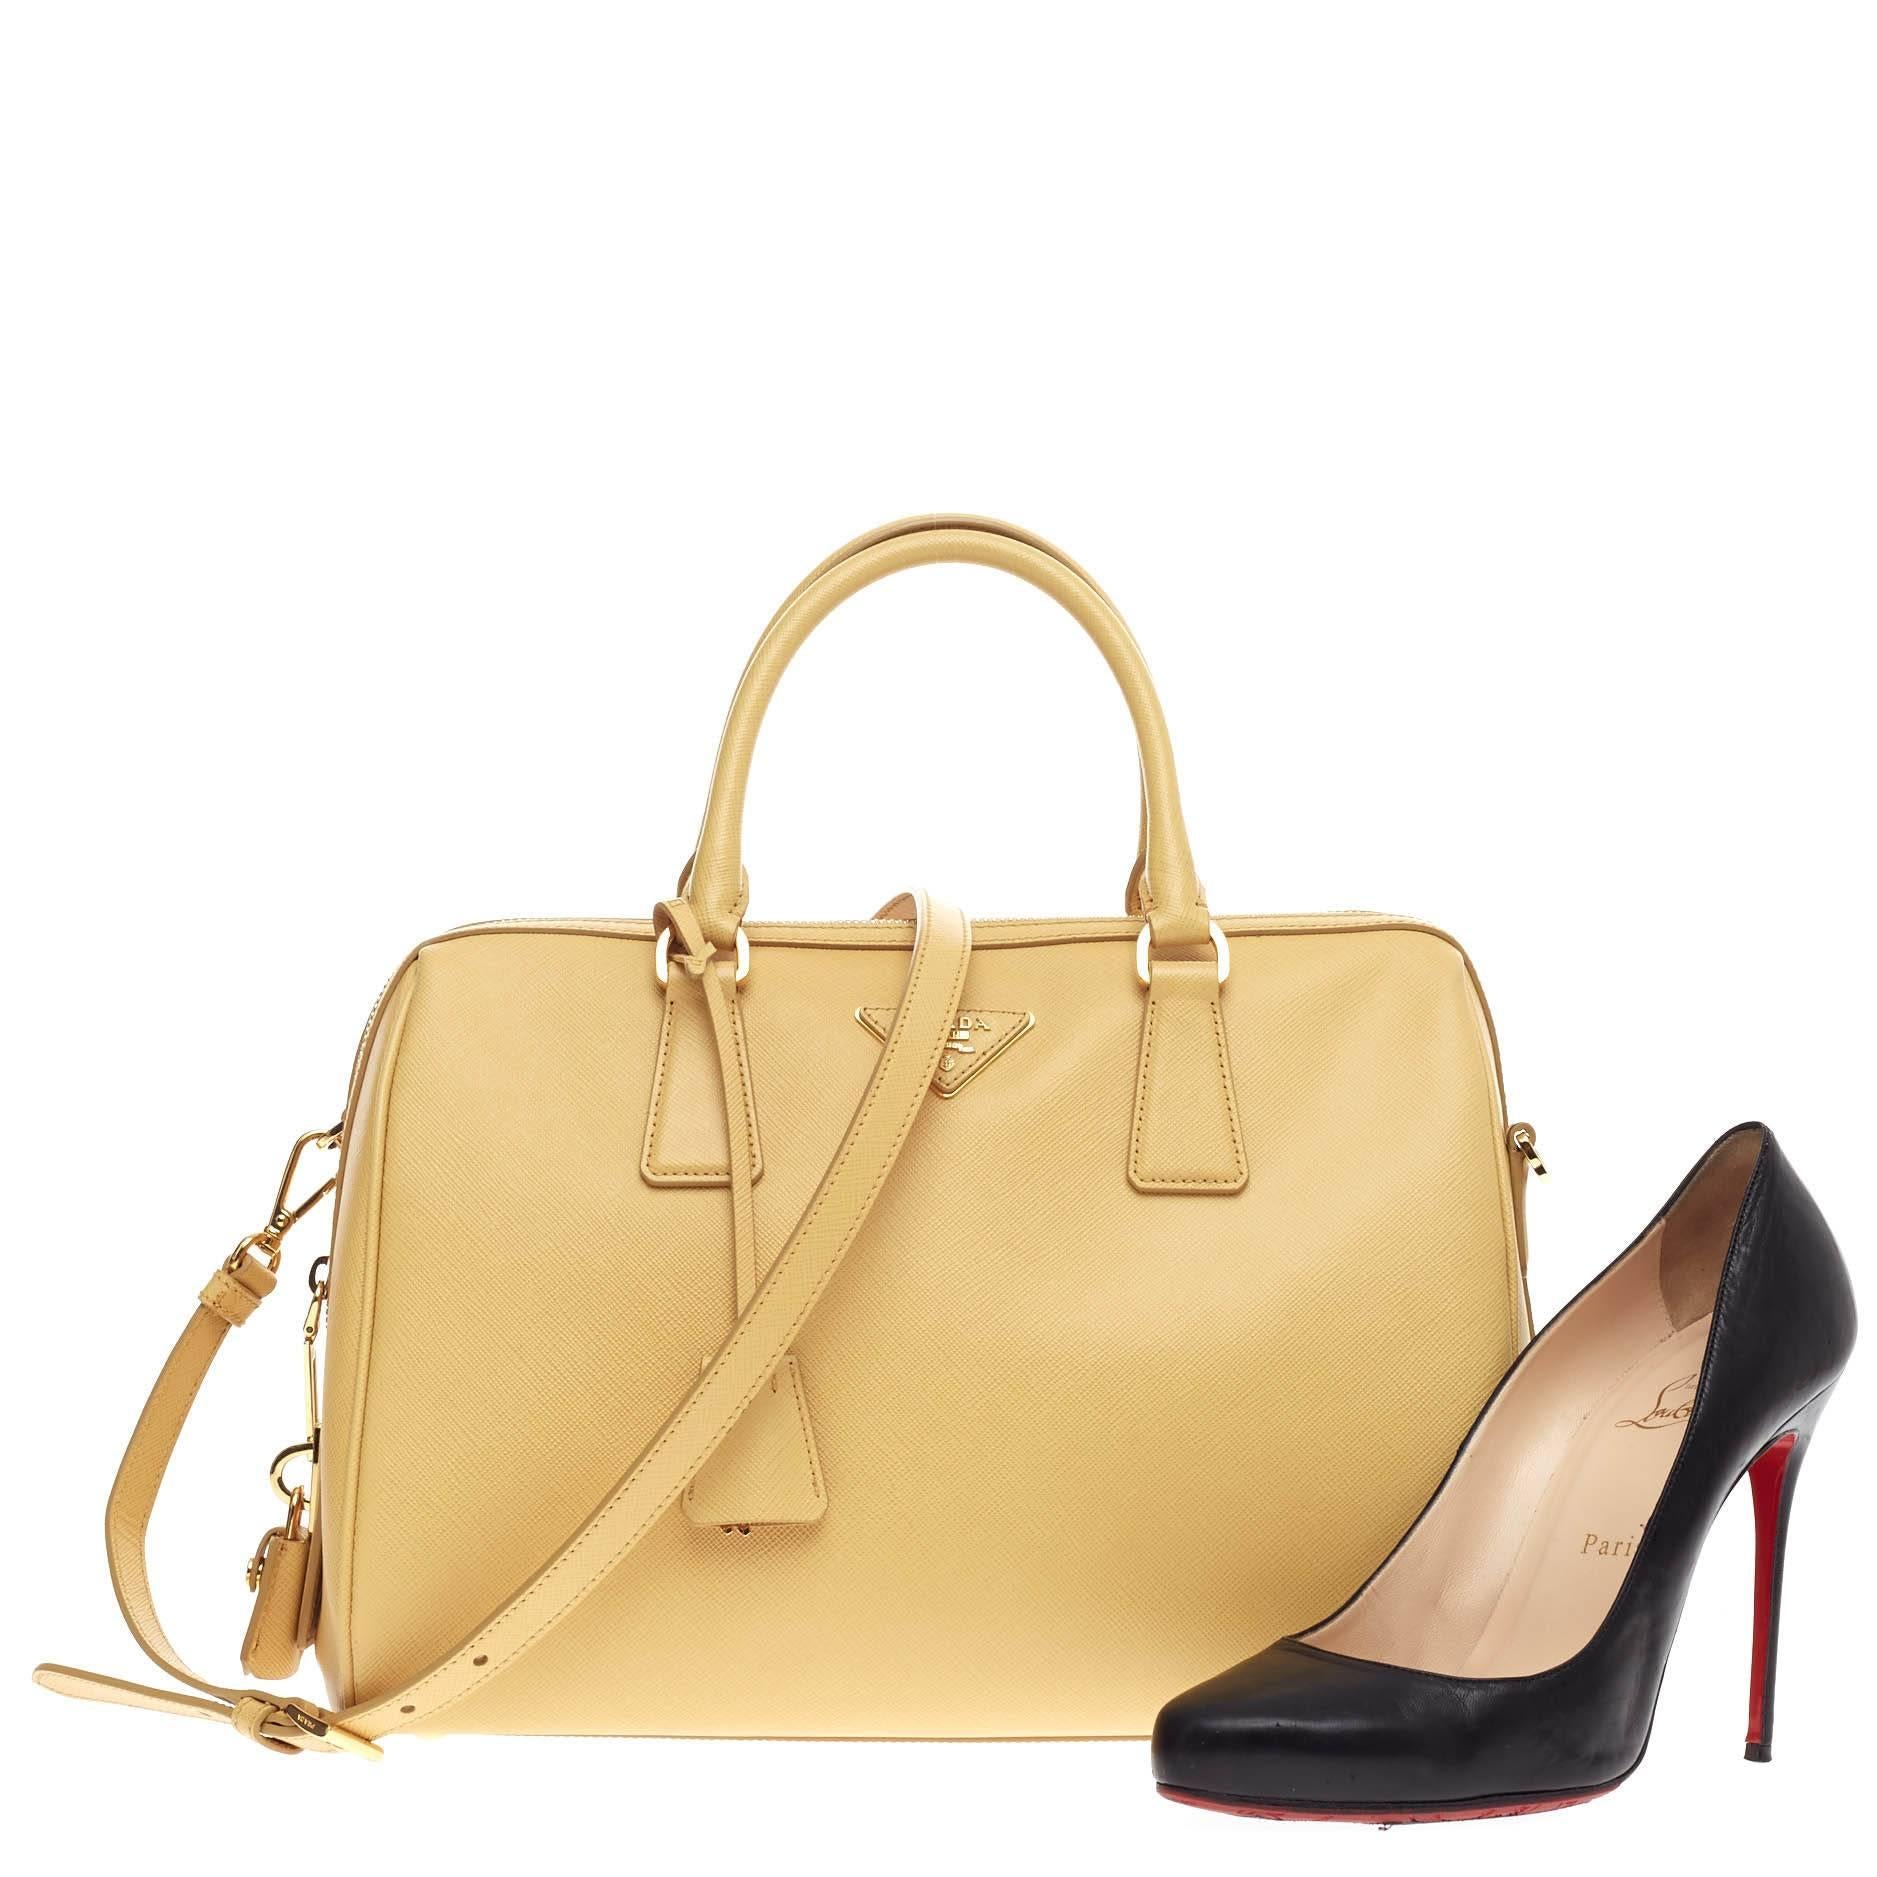 This authentic Prada Convertible Bowler Saffiano Leather Medium exudes a stylish and industrial design made for everyday excursions. Crafted from light yellow saffiano leather, this structured bowler satchel features dual-rolled top handles,